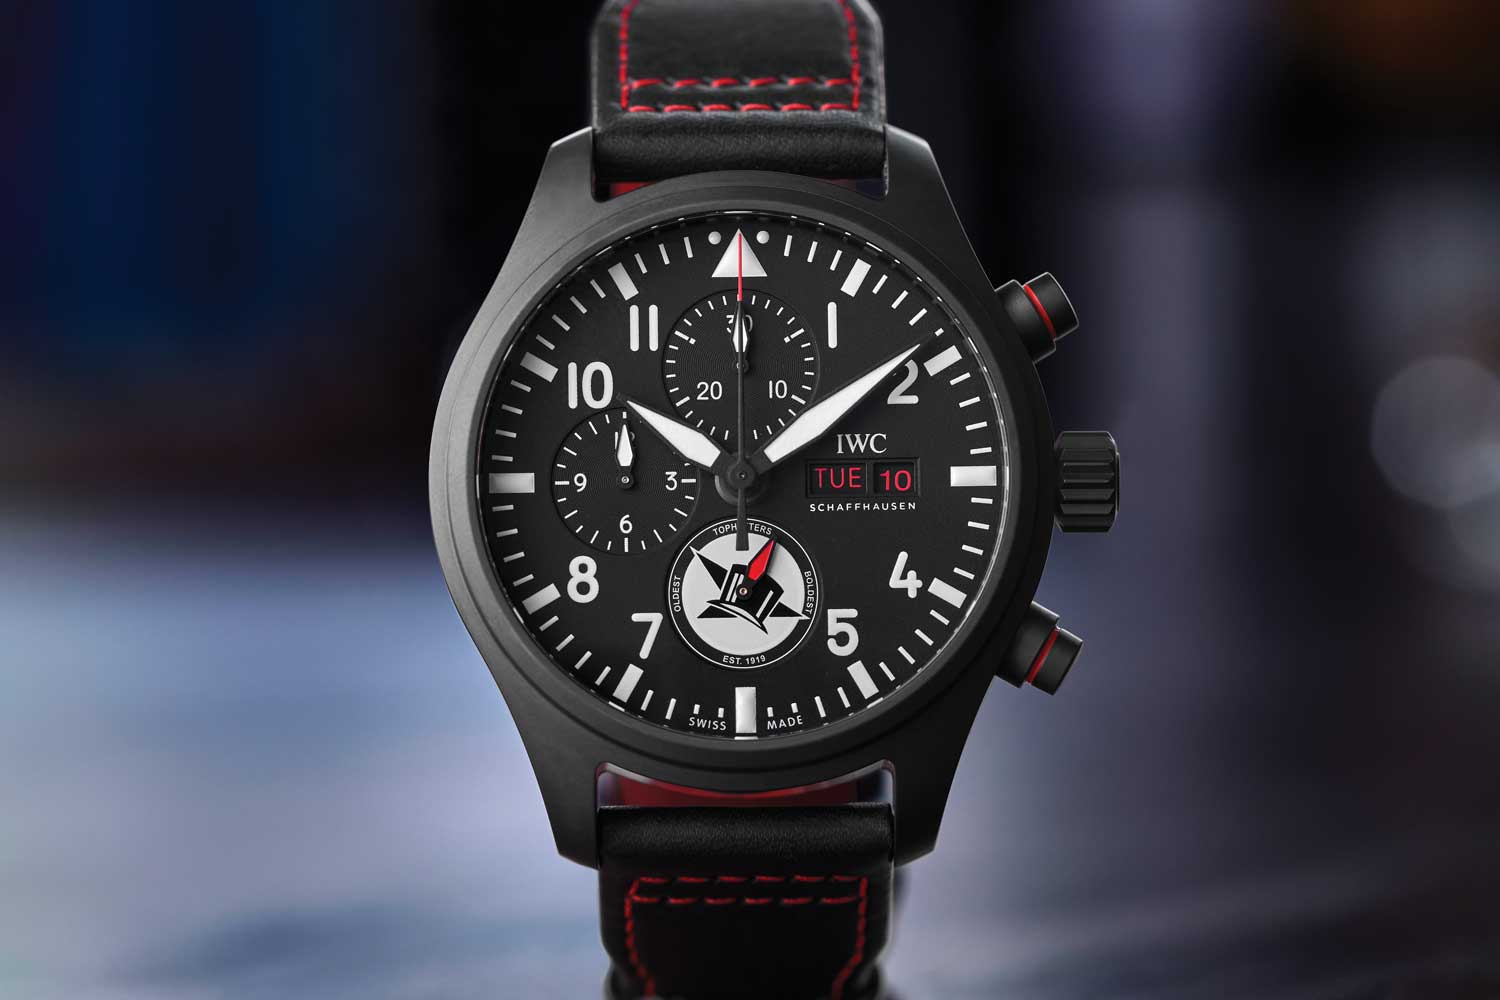 Pilot’s Watch Chronograph Edition “Tophatters”